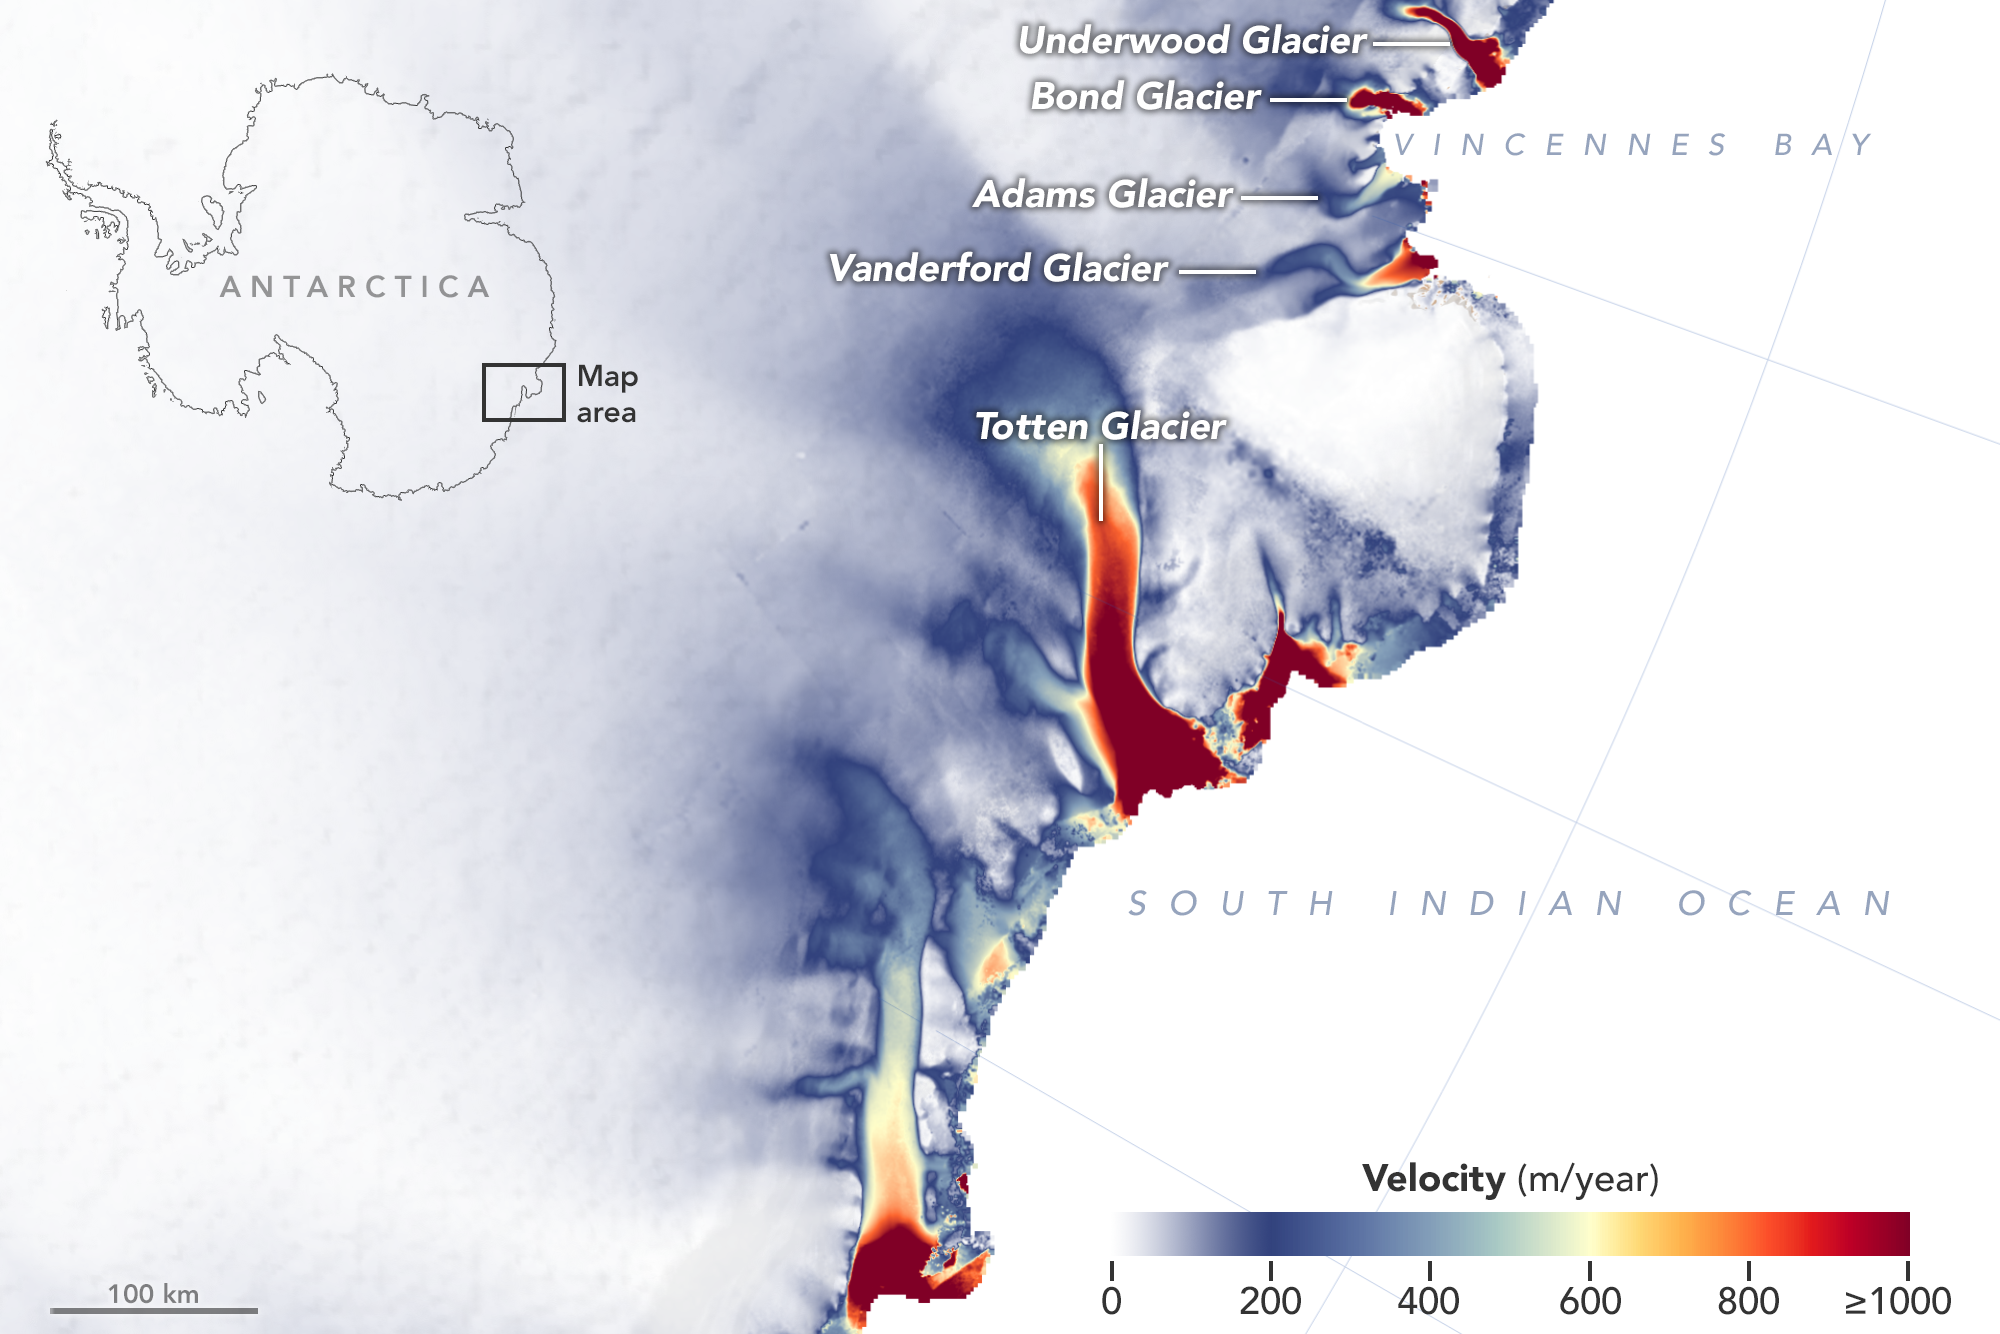 A group of four glaciers in an area of East Antarctica called Vincennes Bay, west of the massive Totten Glacier, have lowered their surface height by about 9 feet since 2008, hinting at widespread changes in the ocean